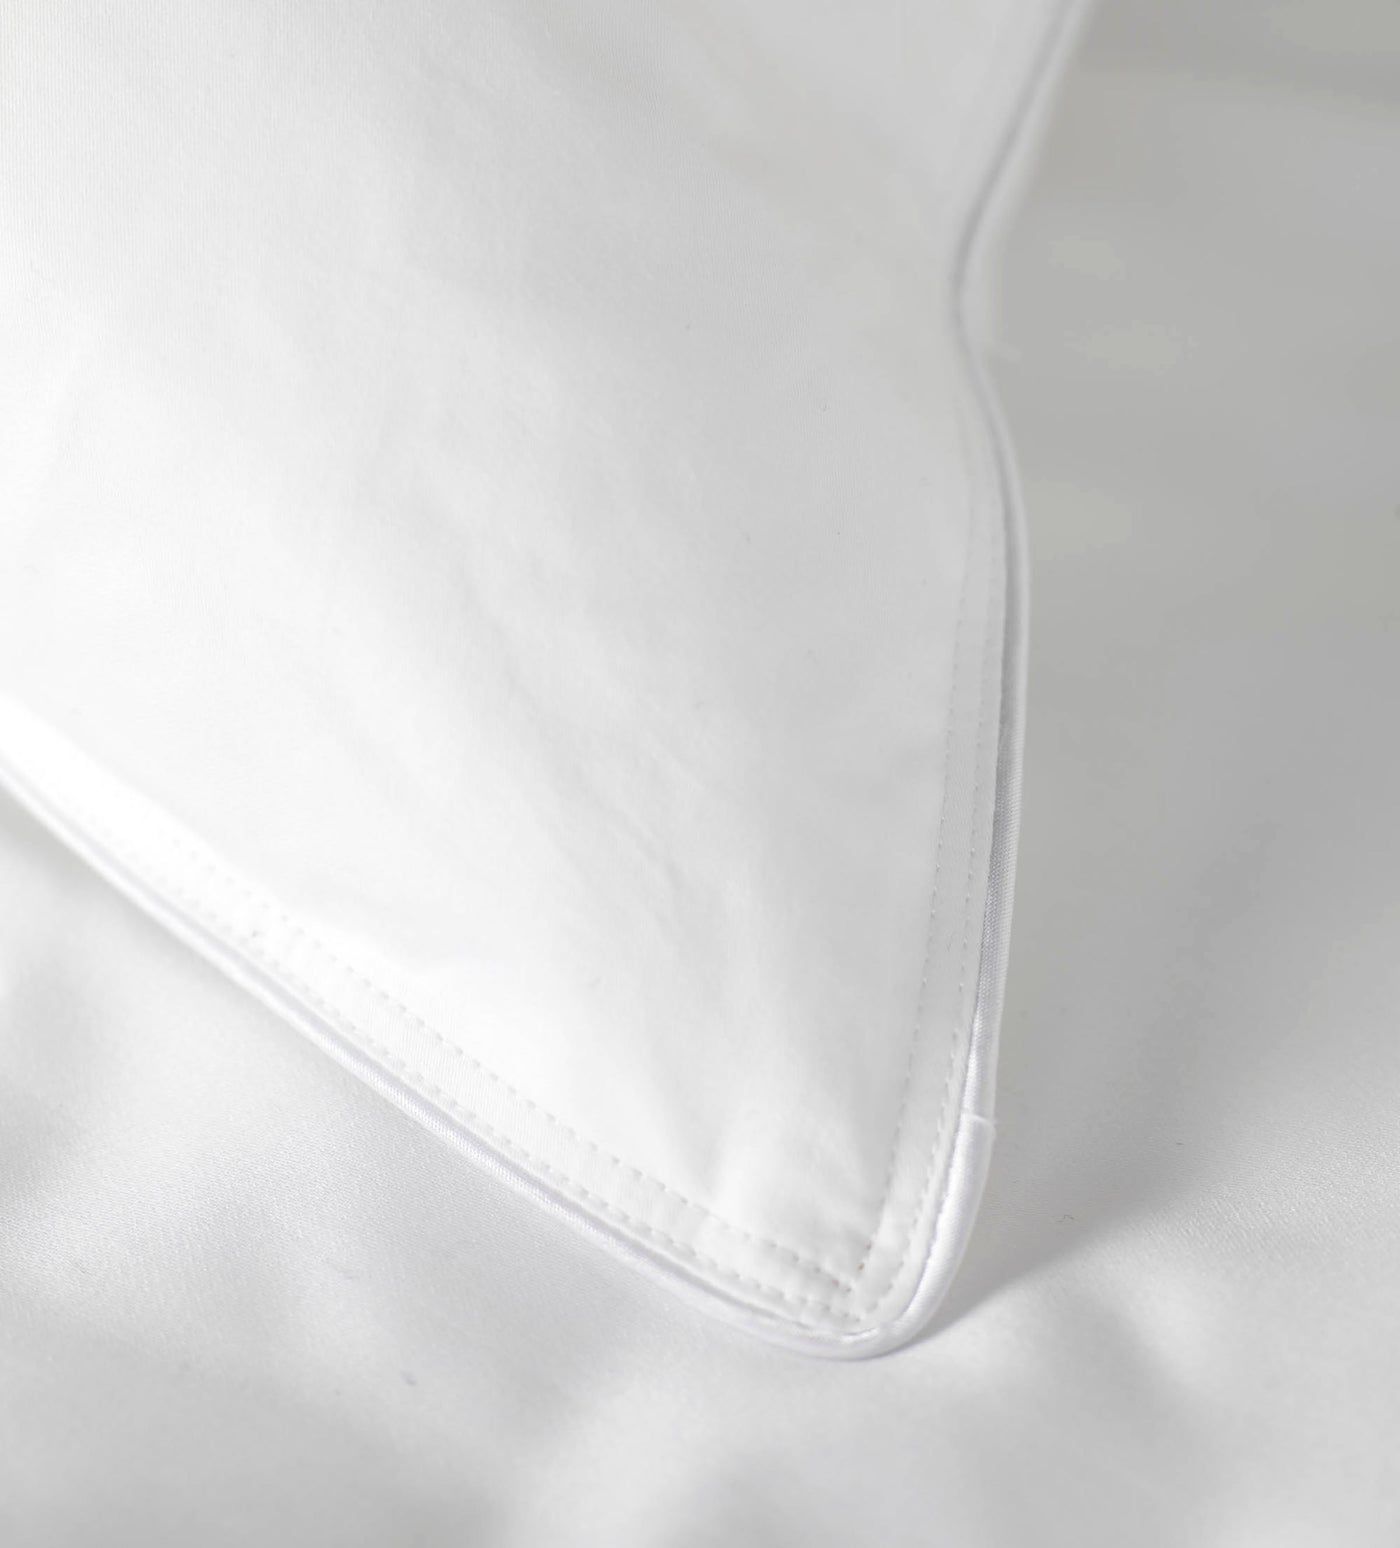 Vendare Goose Feather Down Pillow, Bed Pillows for Sleeping